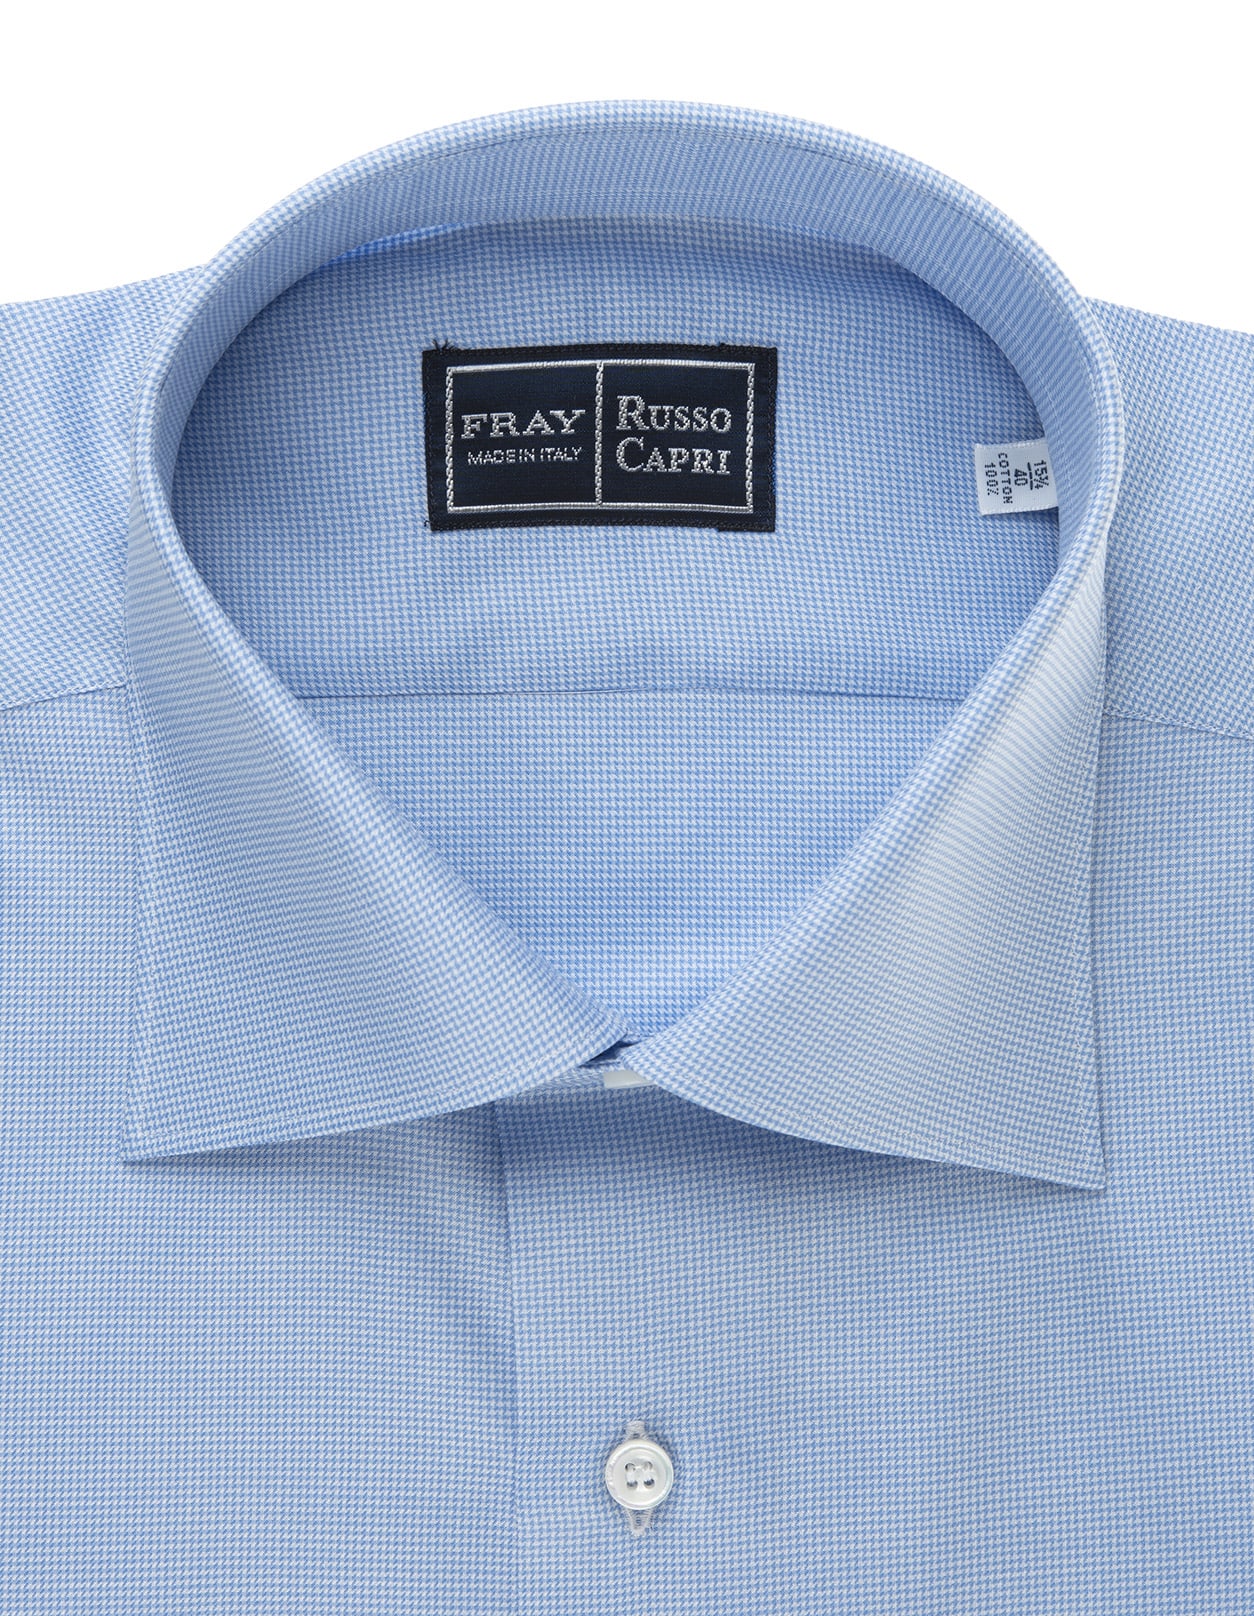 Shop Fray Regular Fit Shirt In White And Light Blue Oxford Cotton